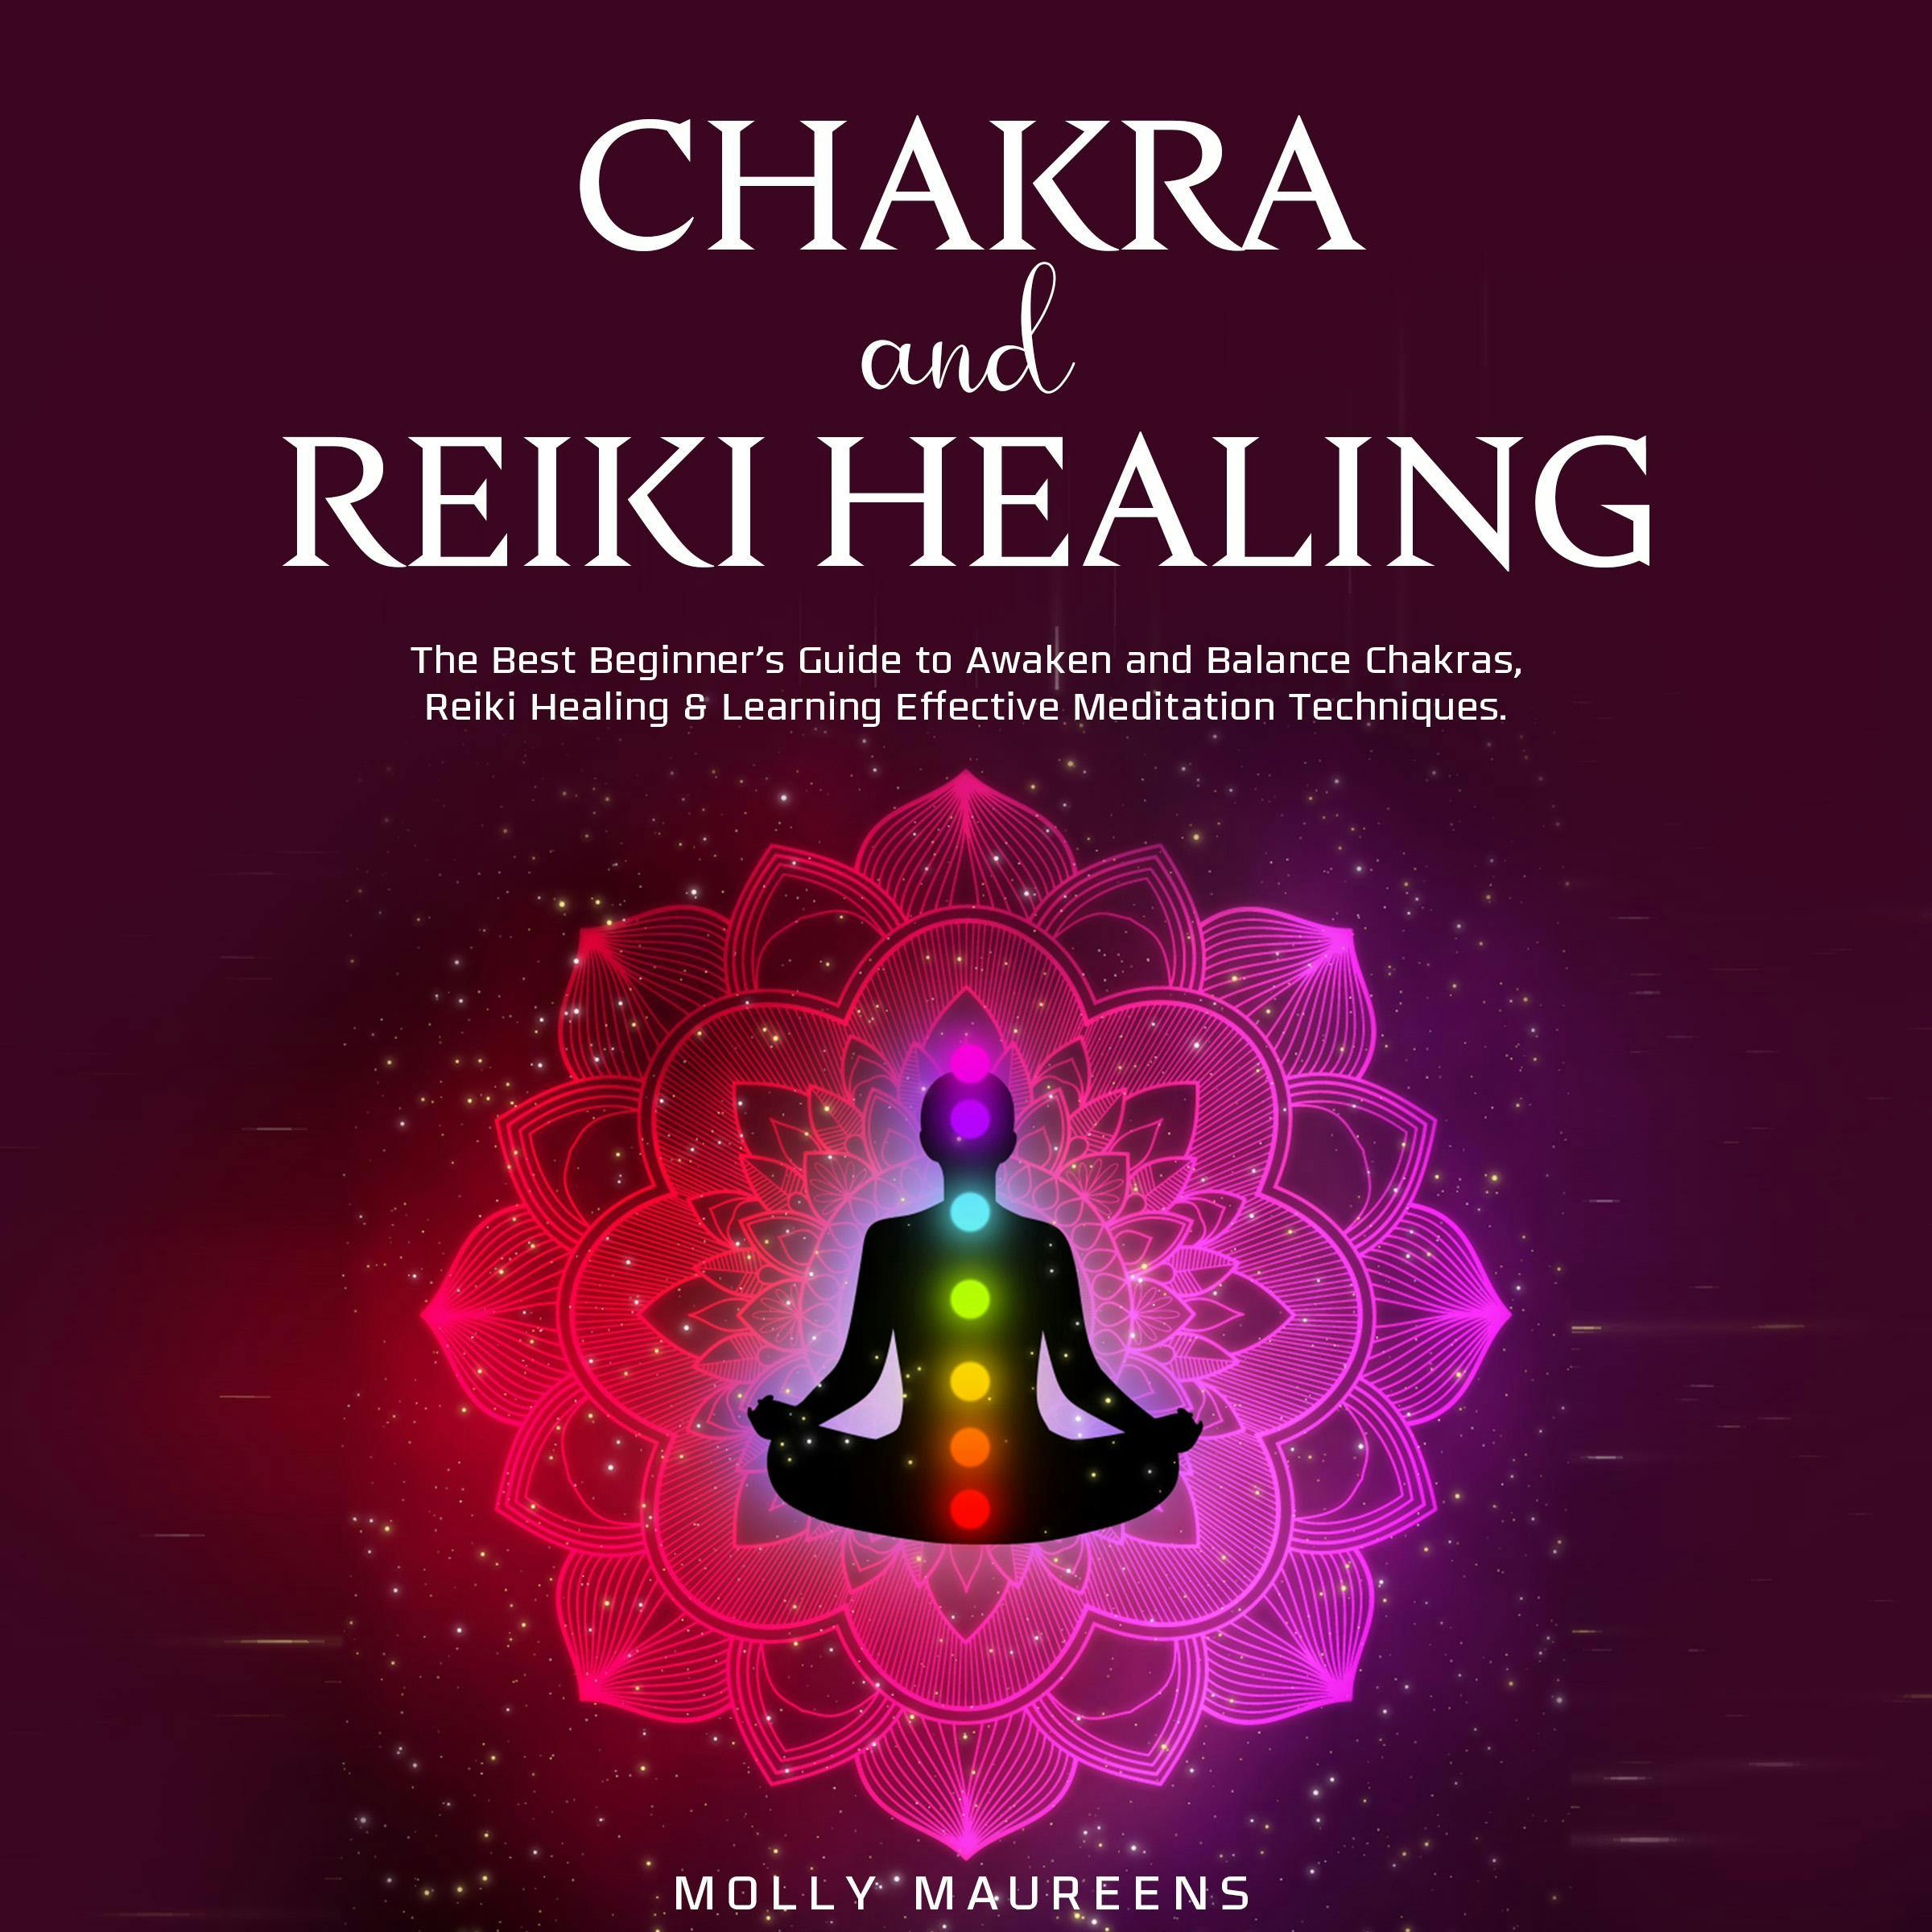 Chakra and Reiki Healing: The Best Beginner’s Guide to Awaken and Balance Chakras, Reiki Healing & Learning Effective Meditation Techniques. - undefined